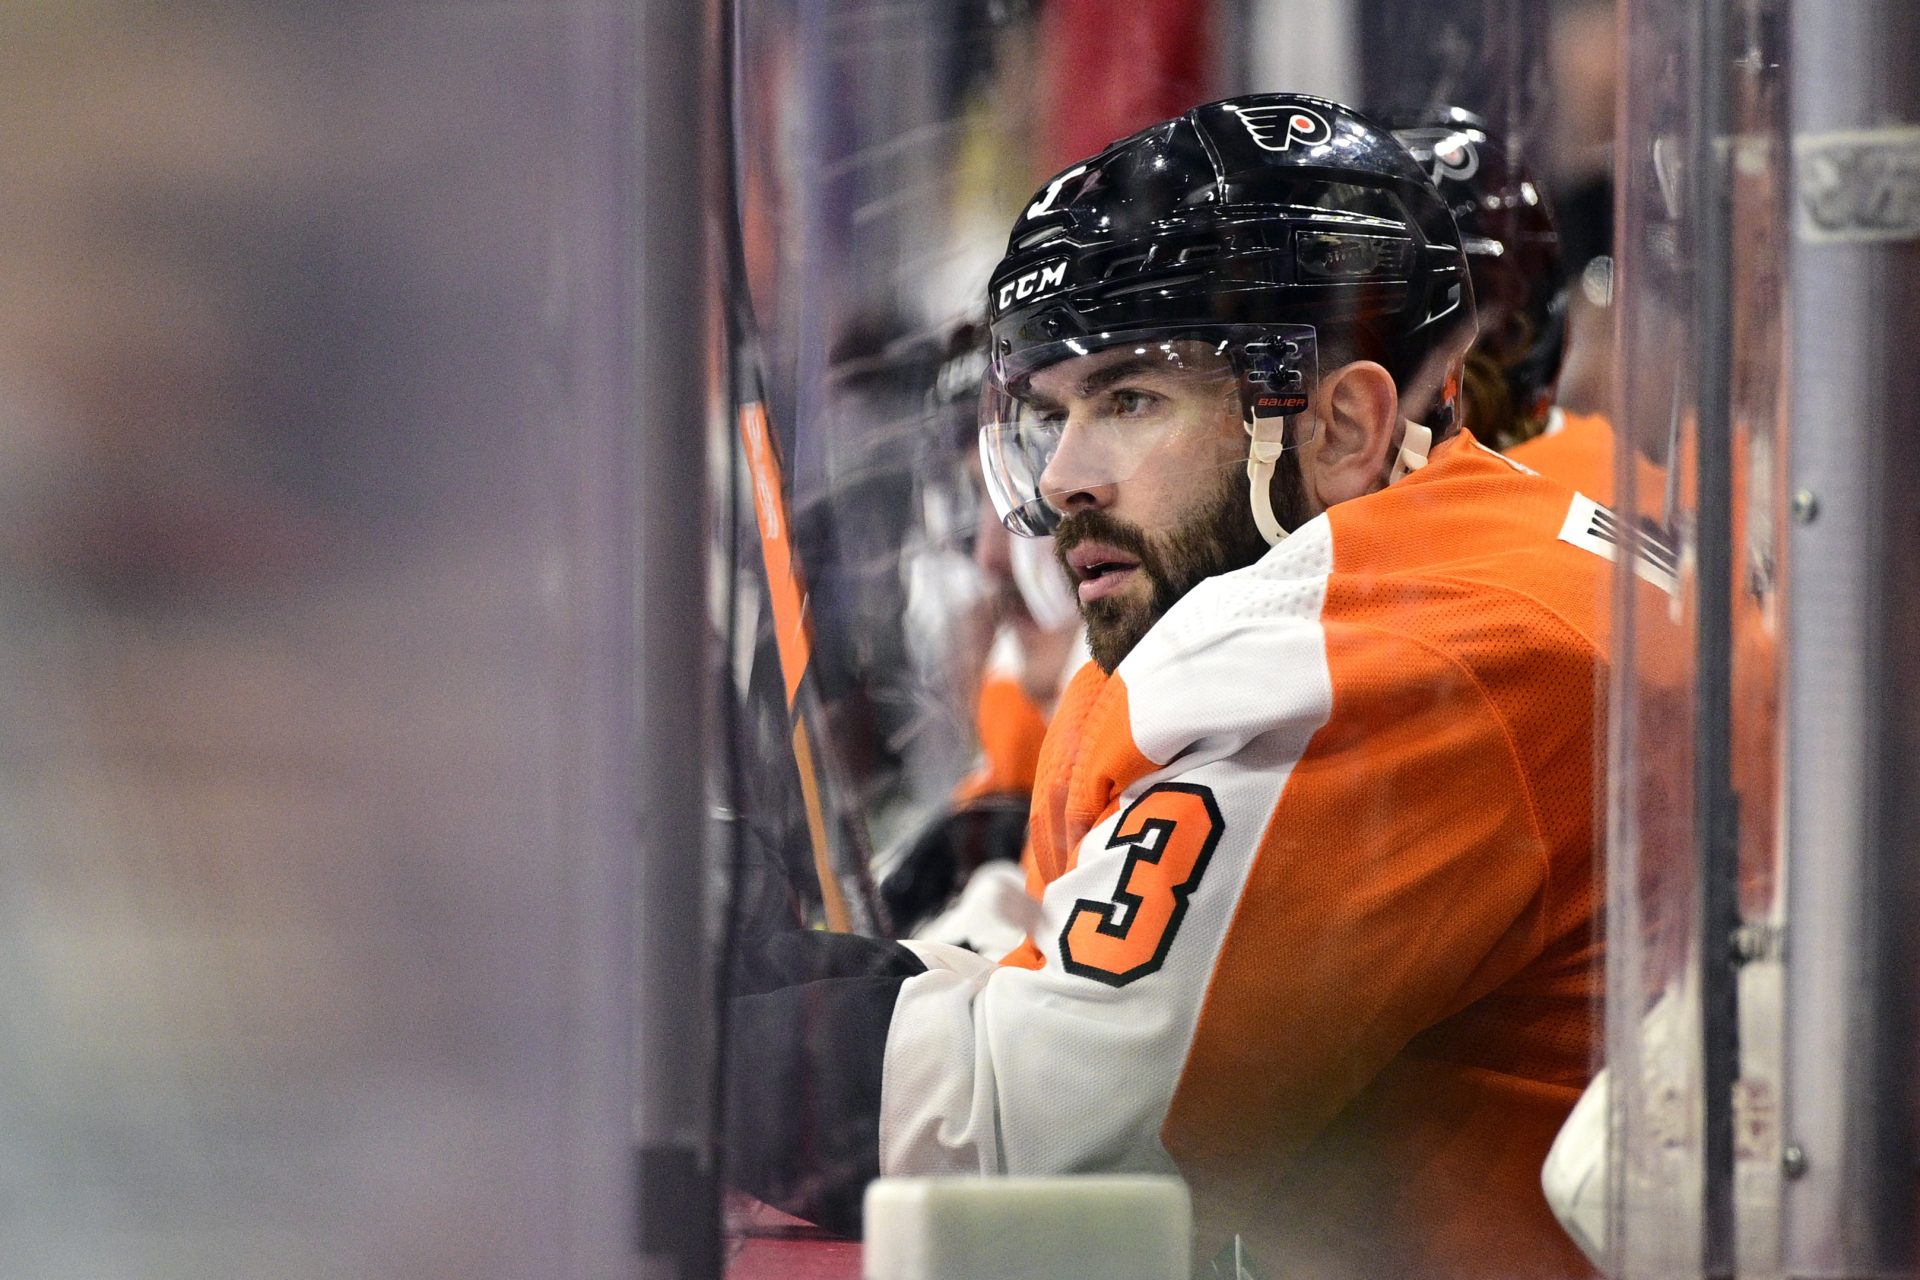 Philadelphia Flyers' Keith Yandle looks on from the bench during the first period of an NHL hockey game against the Dallas Stars, Monday, Jan. 24, 2022, in Philadelphia.